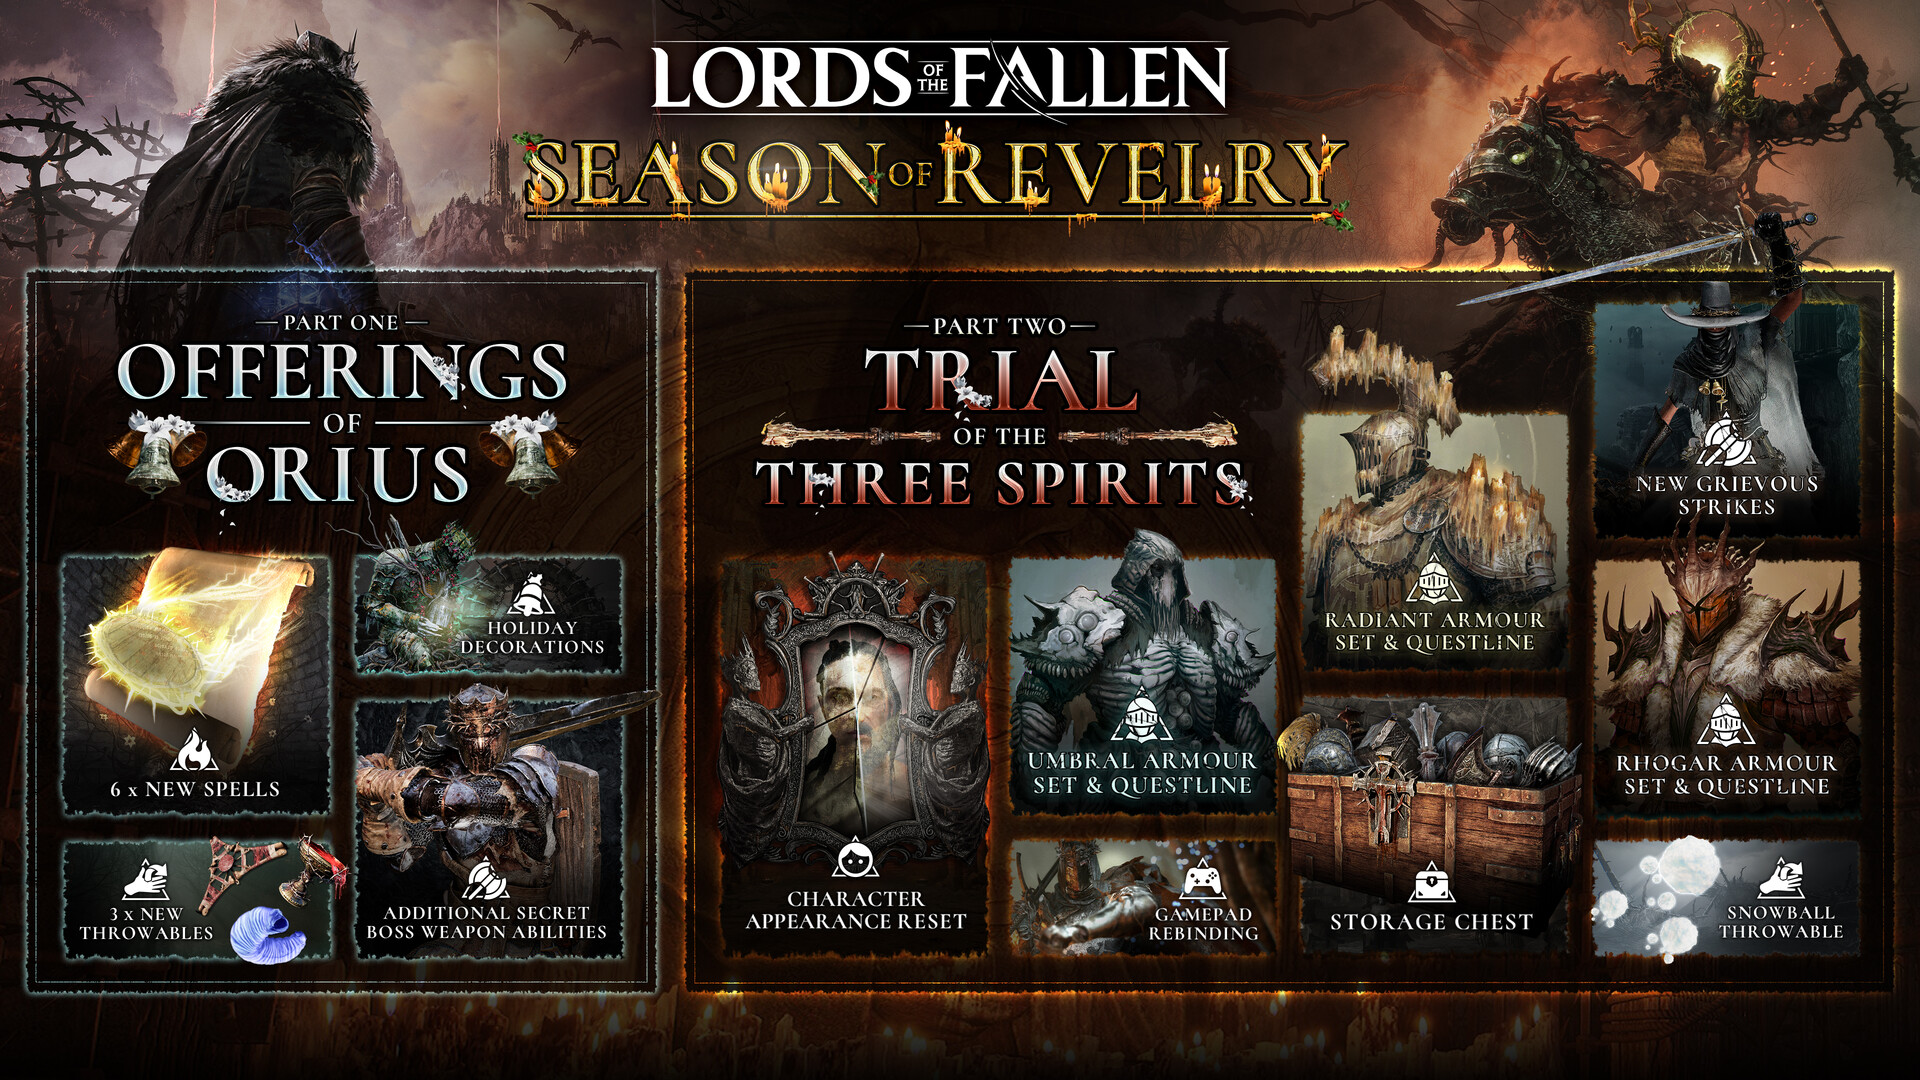 Lords of the Fallen on Steam